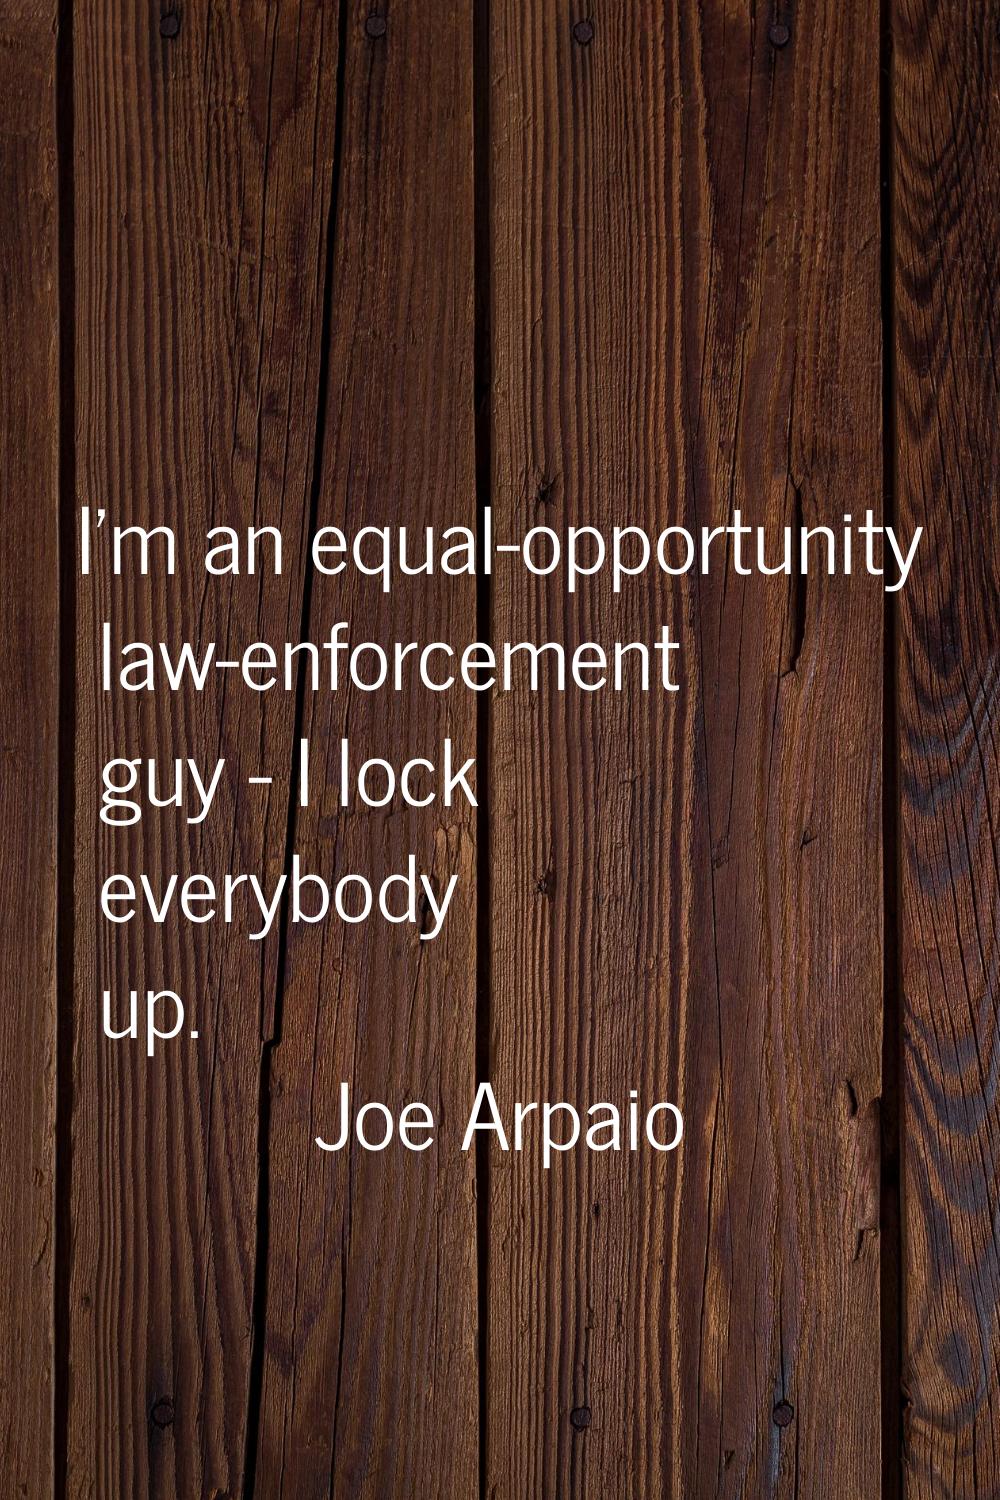 I'm an equal-opportunity law-enforcement guy - I lock everybody up.